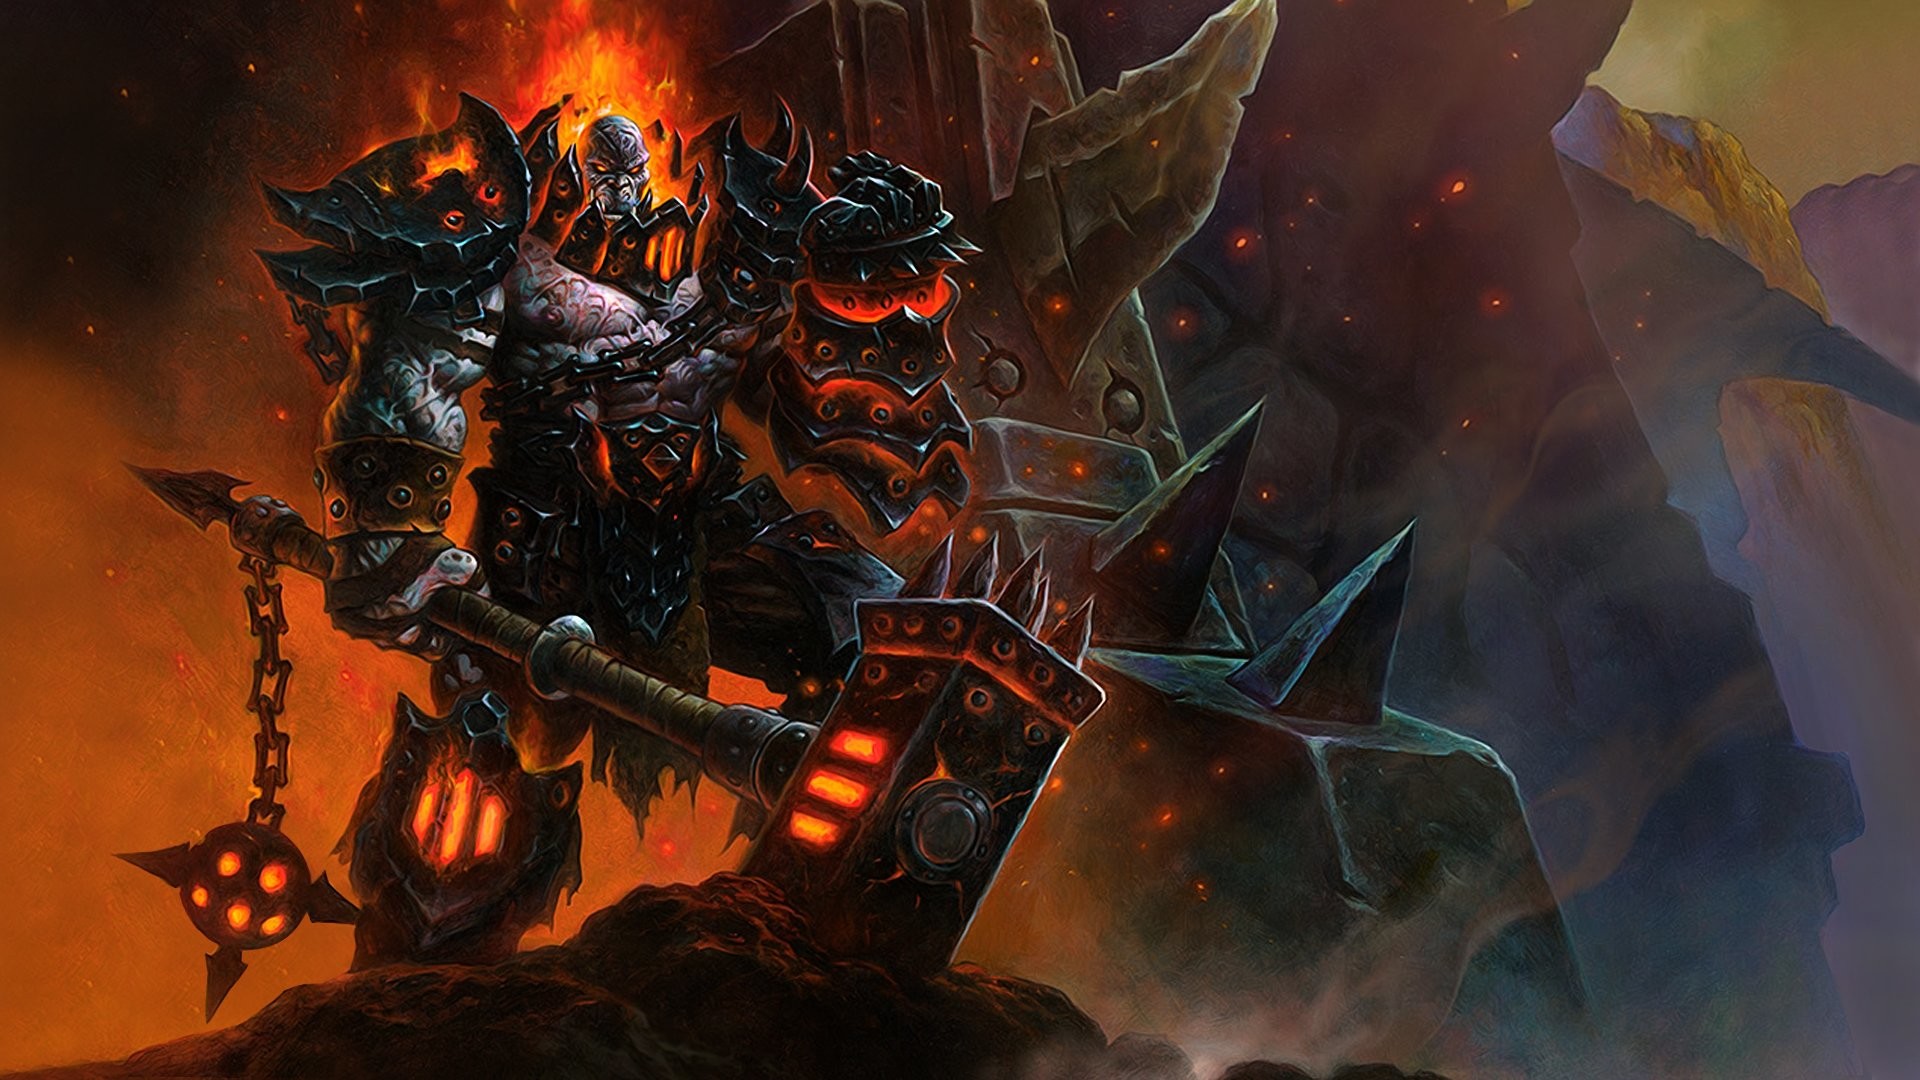 1920x1080 World of Warcraft: Warlords of Draenor HD Wallpapers